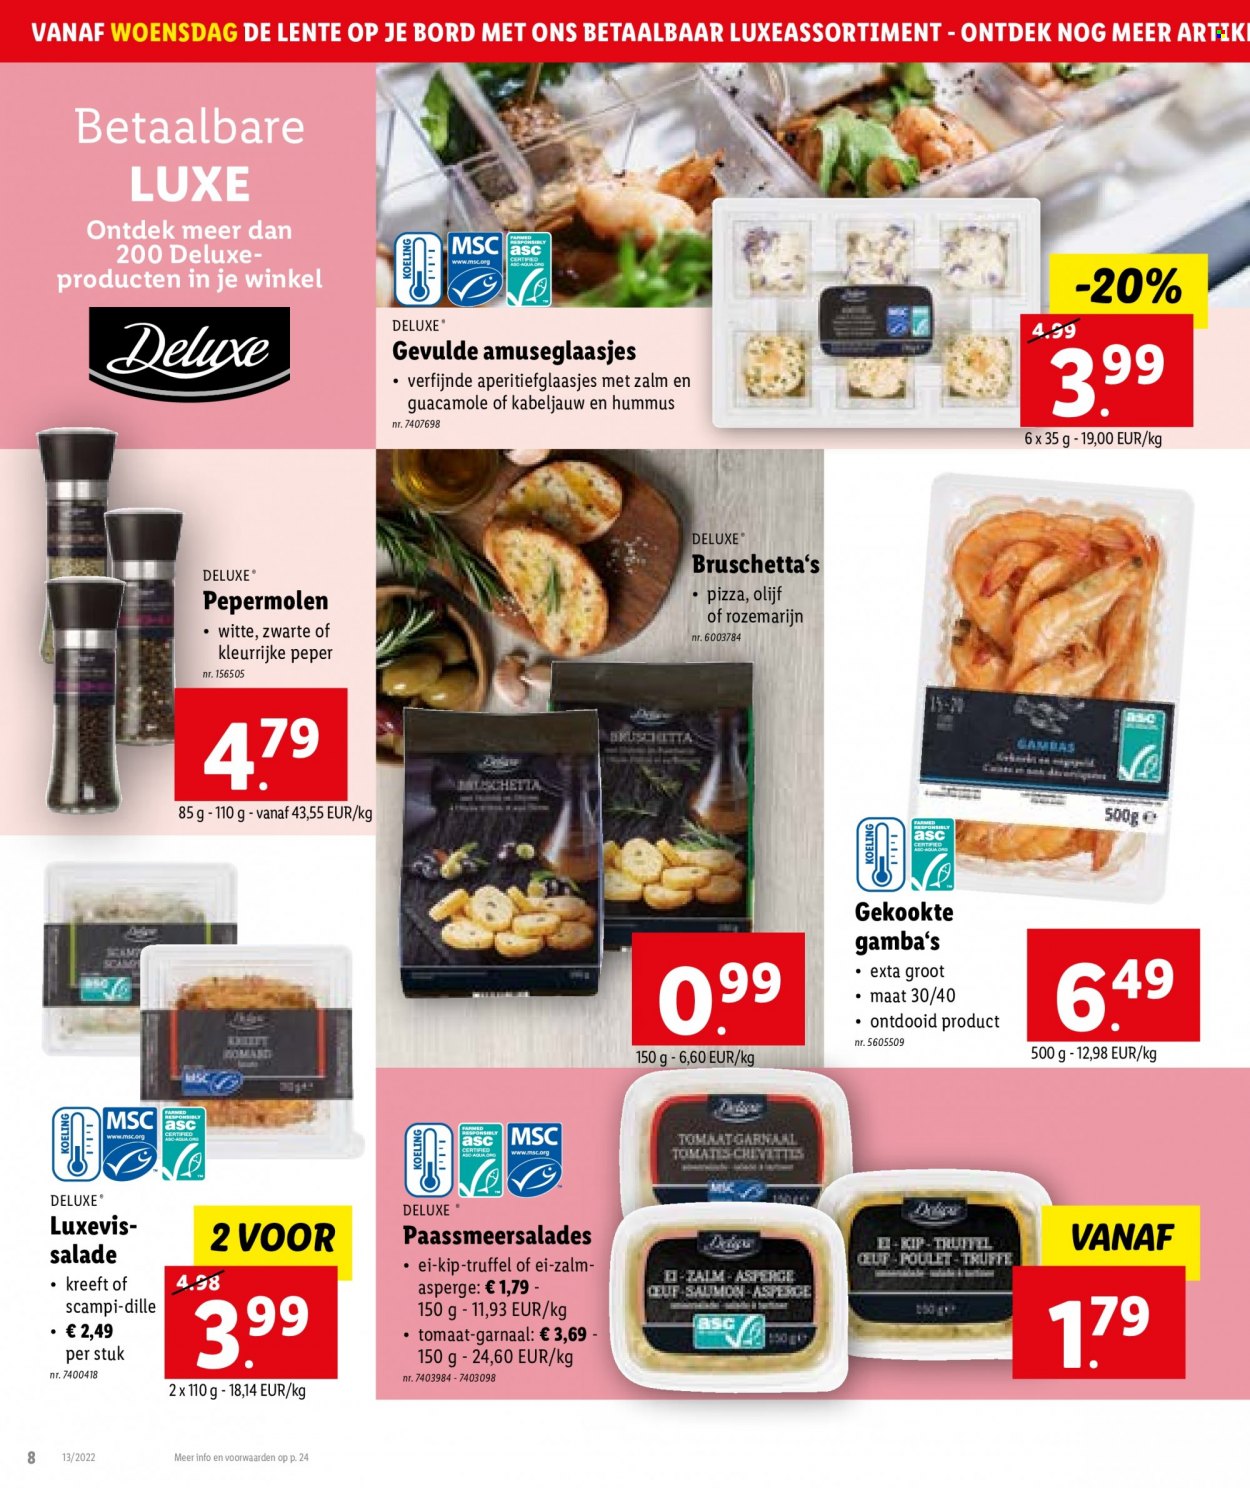 Catalogue Lidl - 29.3.2023 - 4.4.2023. Page 8.